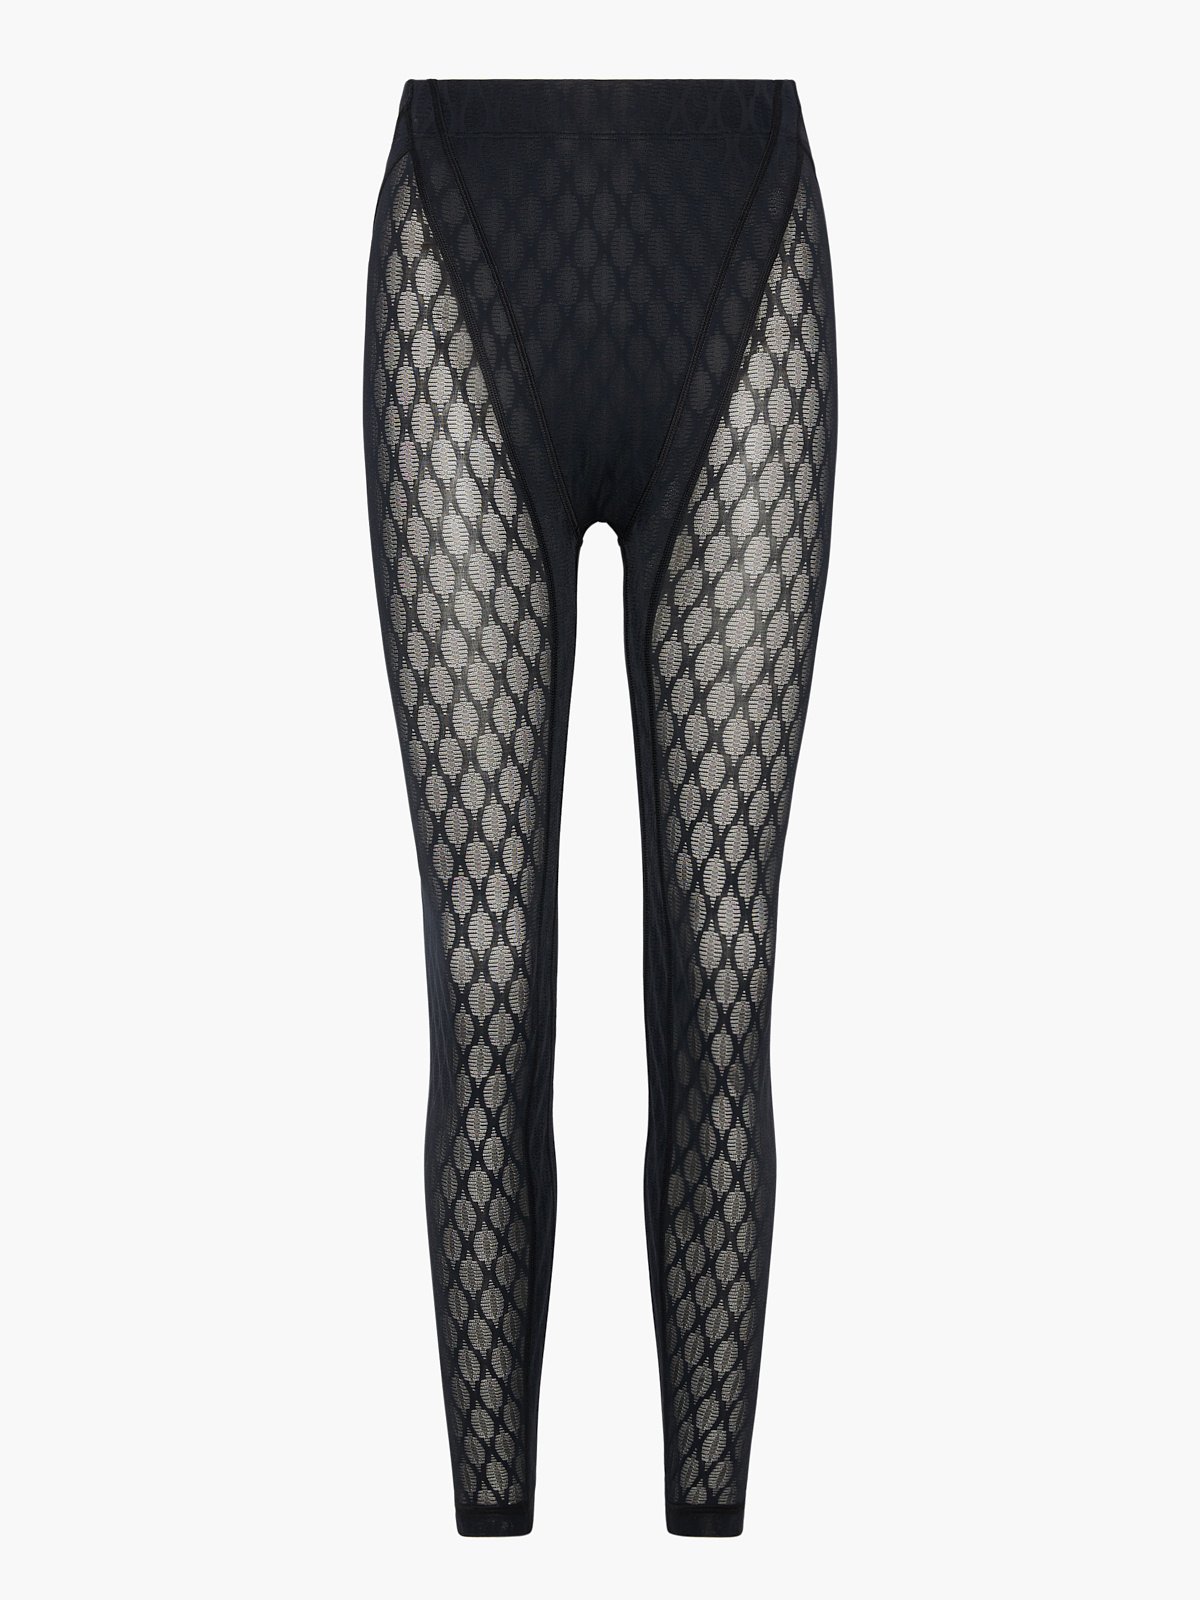 POP Fit Women's Black High Waisted Mesh Leggings Size Medium NWT - $14 New  With Tags - From Rhonda